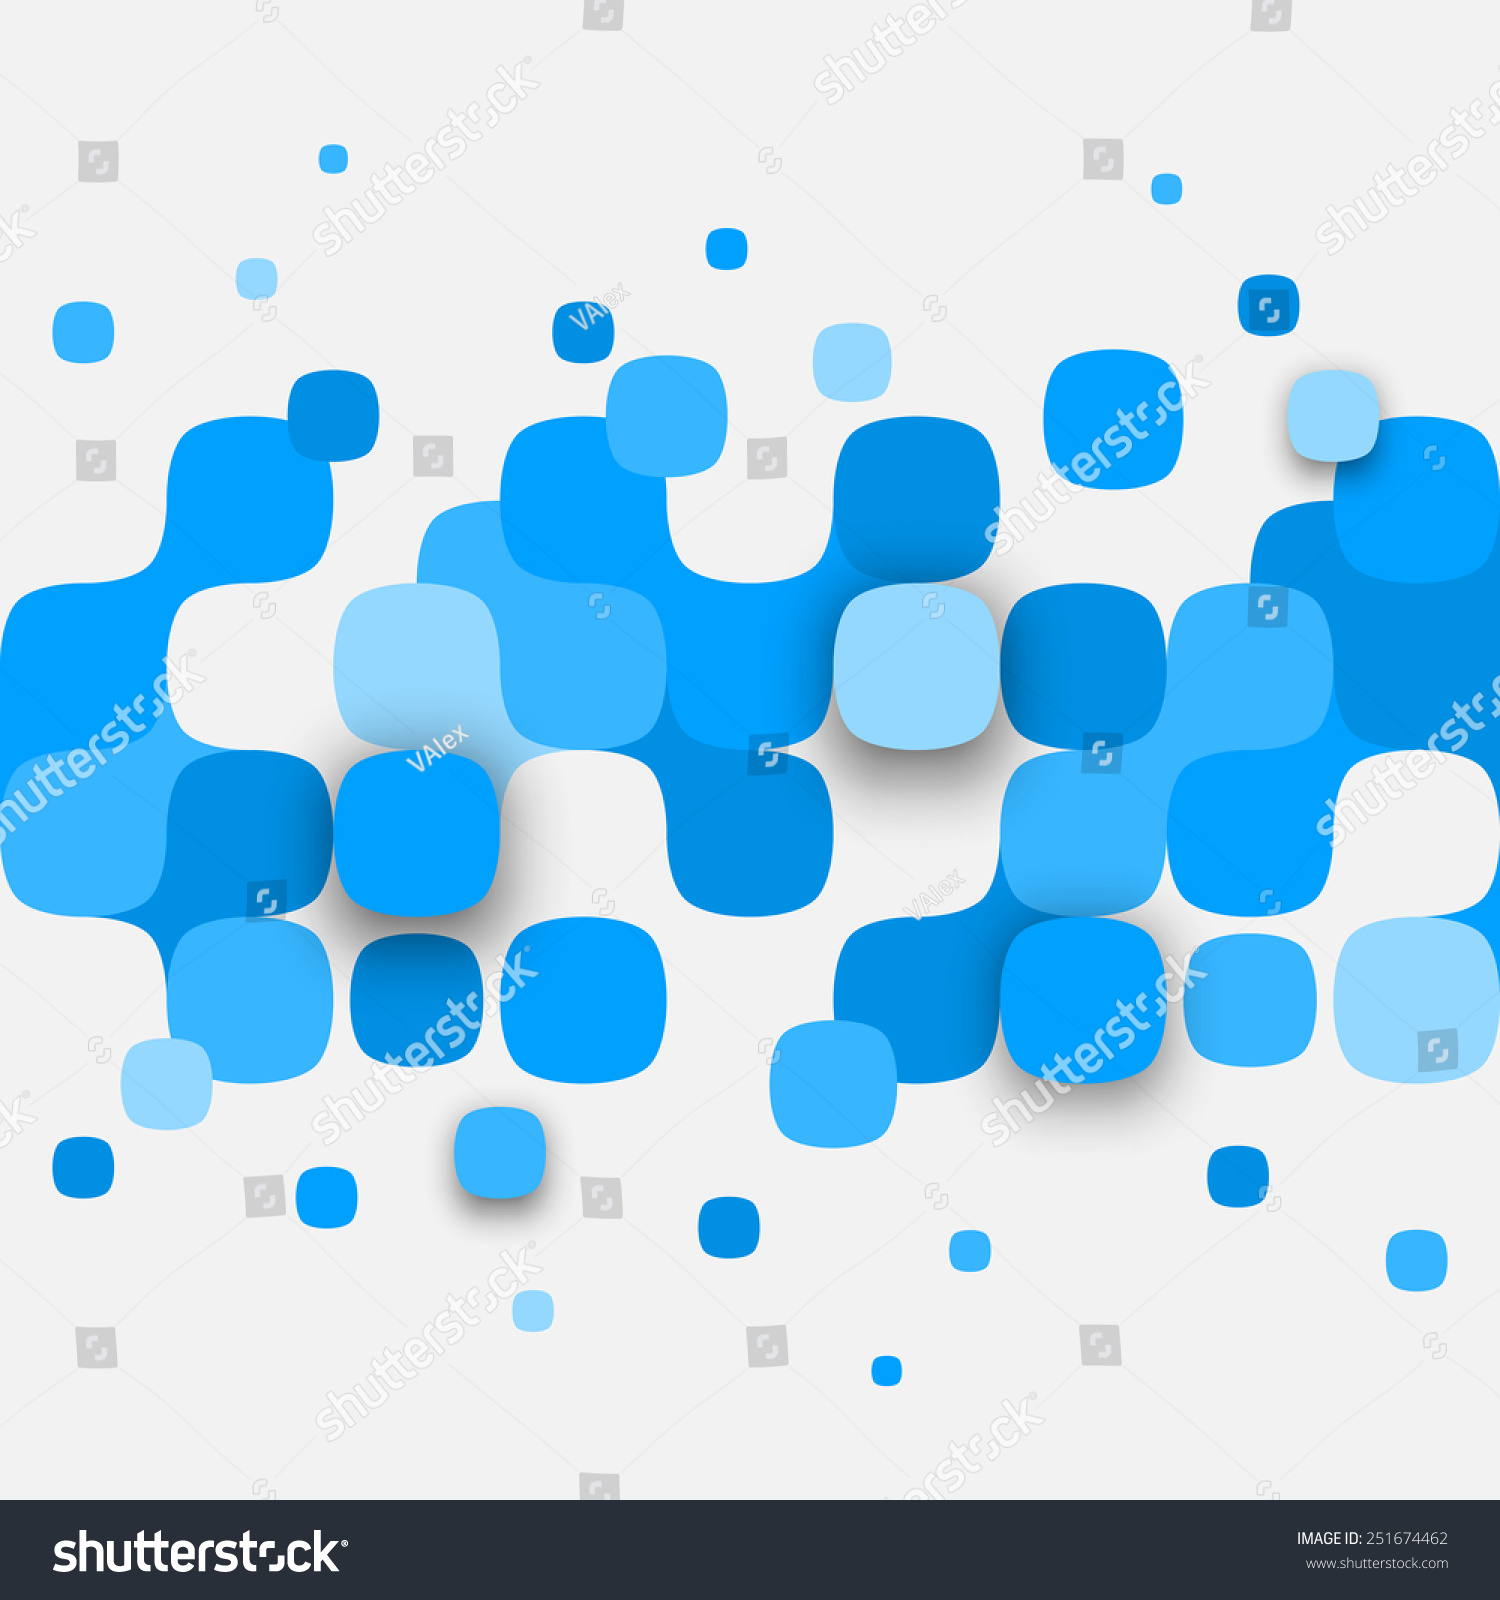 Vector Background  Illustration  Abstract Texture Squares 